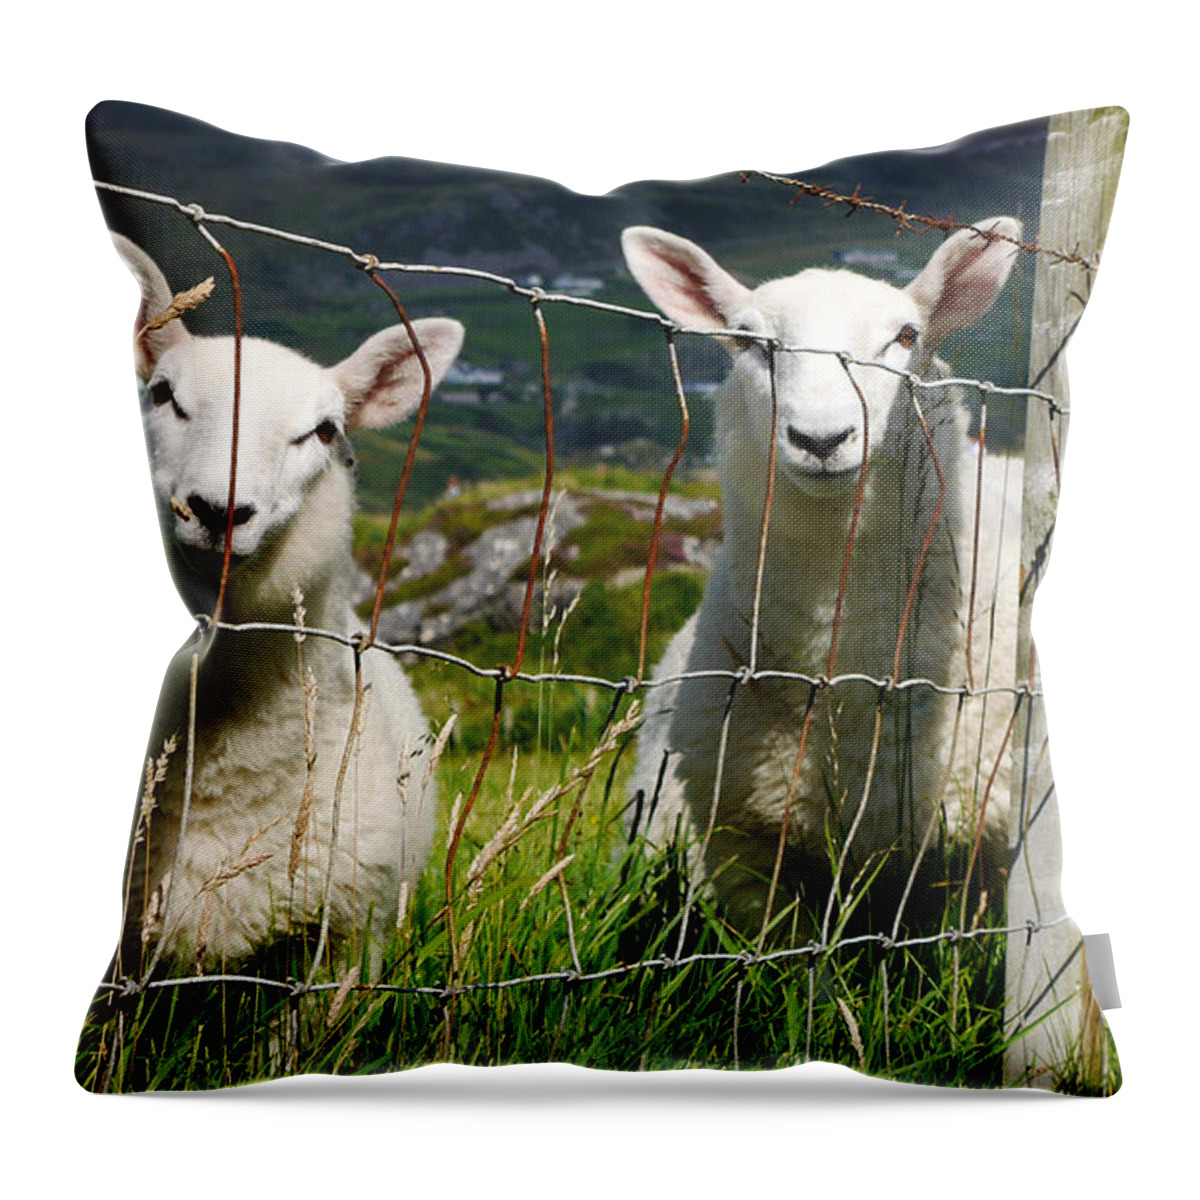 Donegal Ireland Landscape Throw Pillow featuring the photograph Curious Sheep by Lexa Harpell